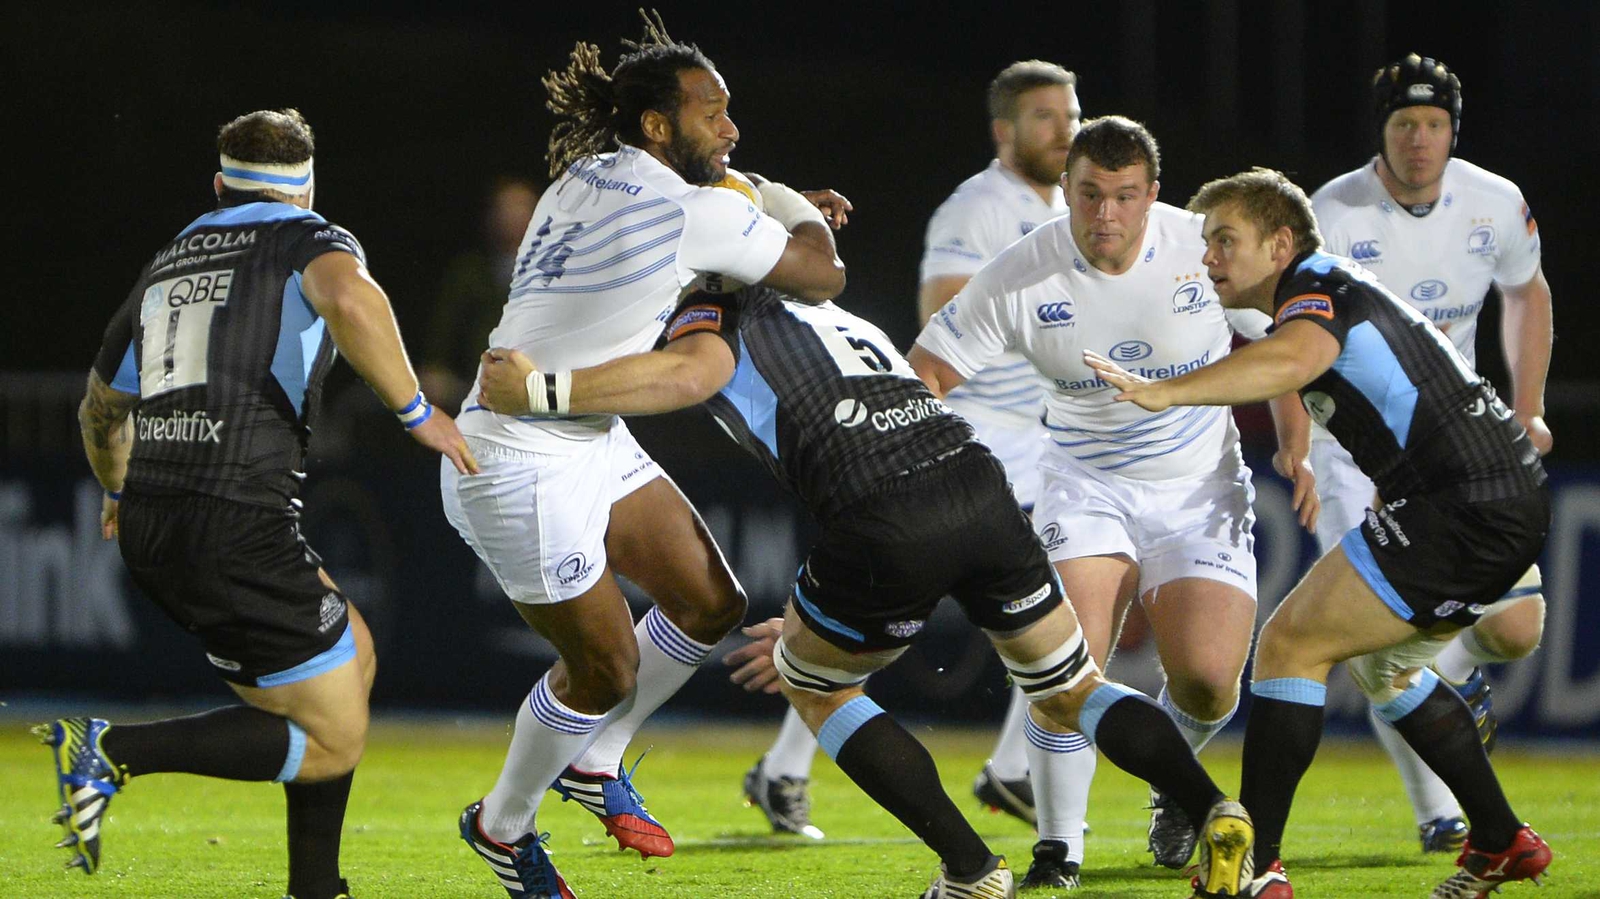 Leinster go top of RaboDirect Pro 12 after victory over Glasgow